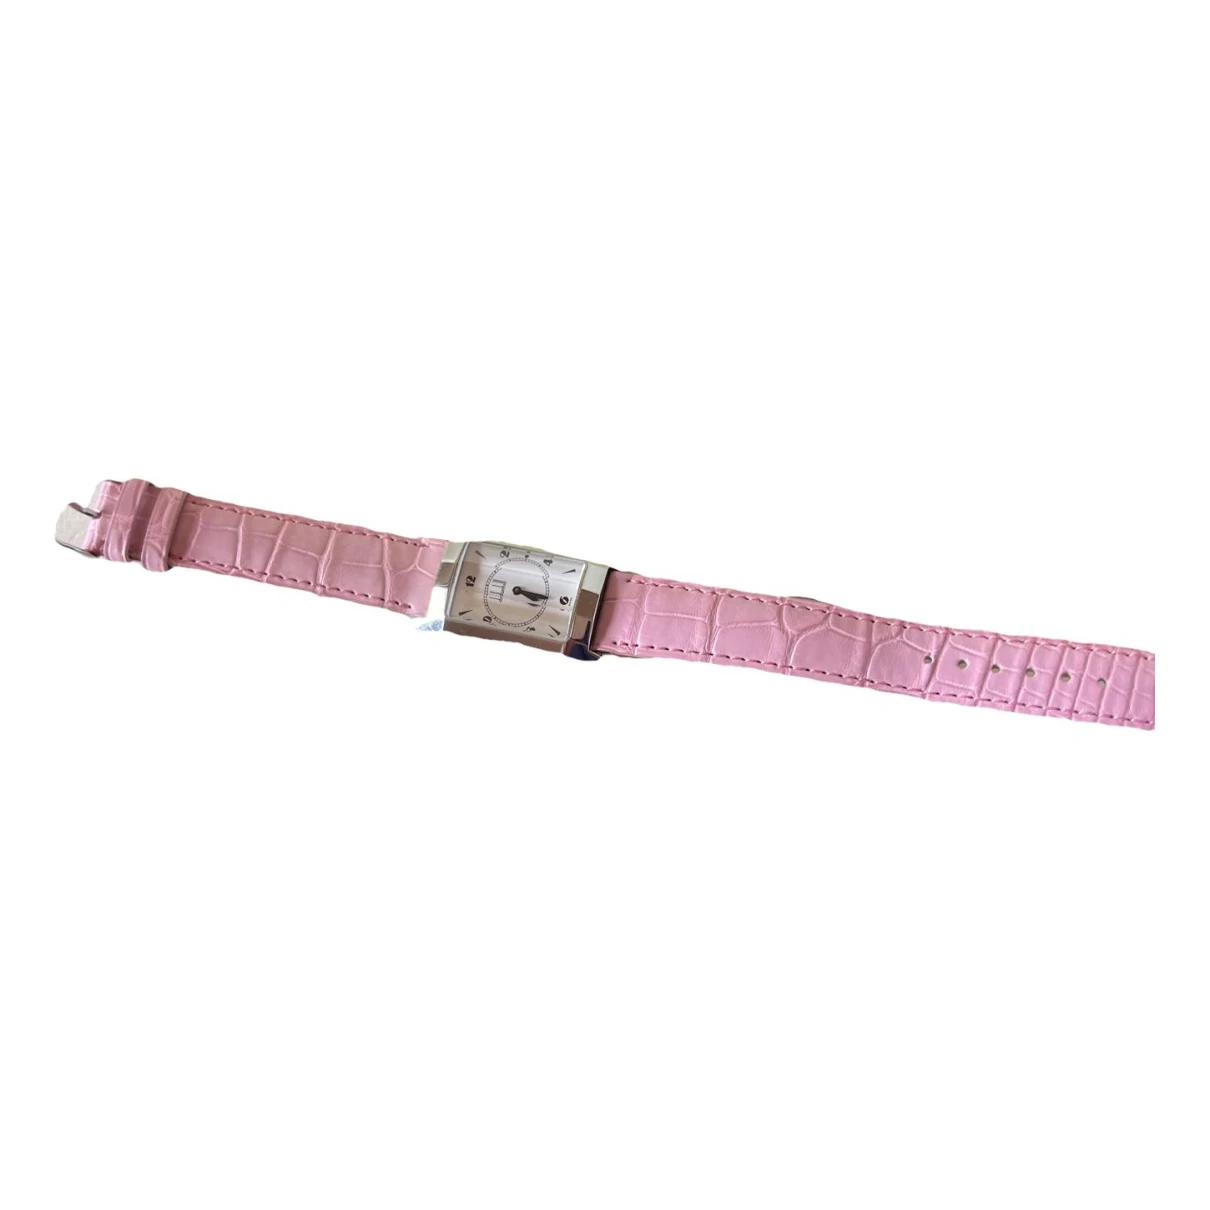 Pre-owned Alfred Dunhill Watch In Pink